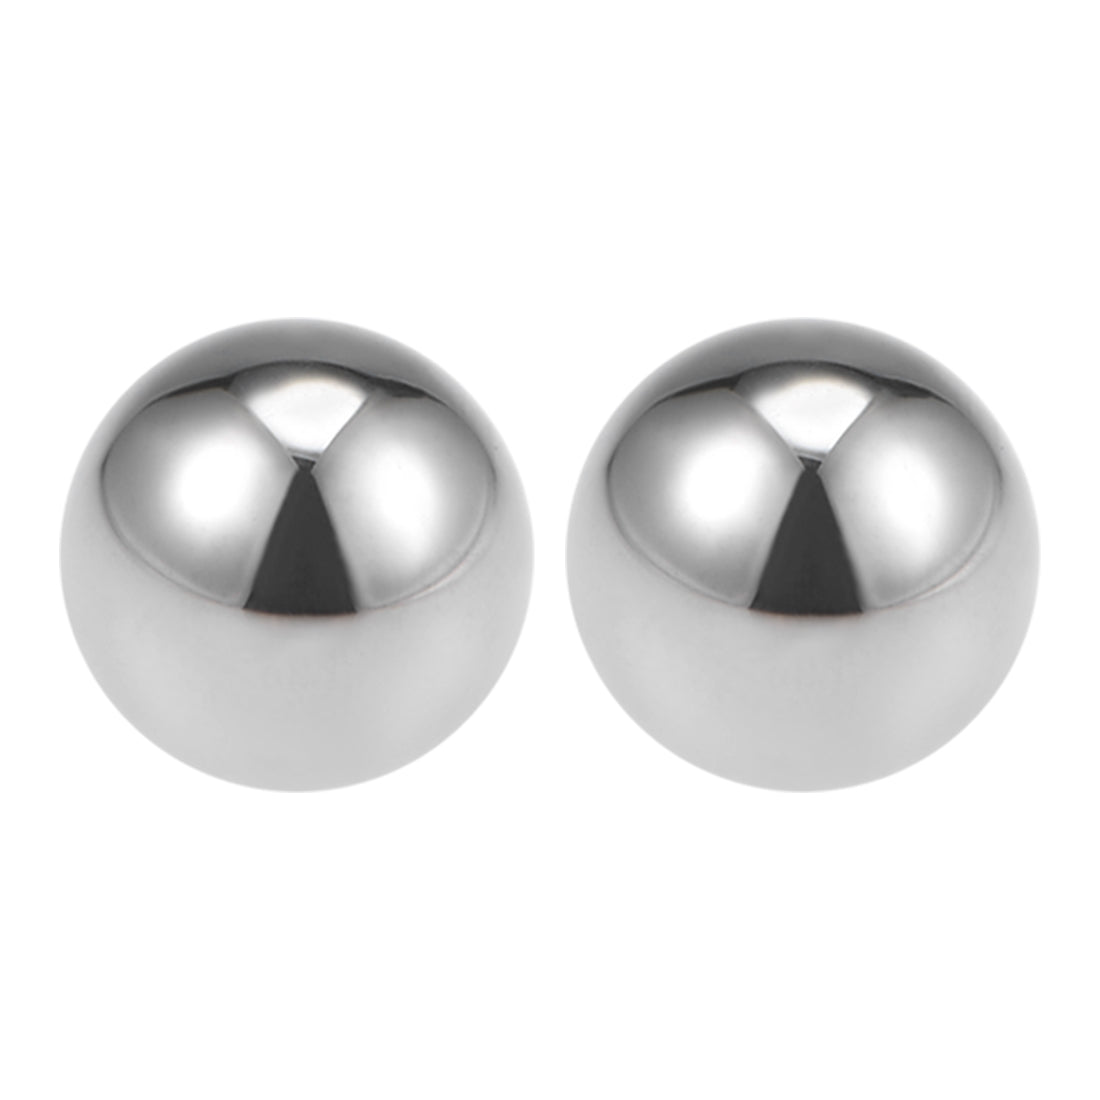 uxcell Uxcell 1-1/2 Inch Precision Chrome Steel Bearing Balls G25 2pcs